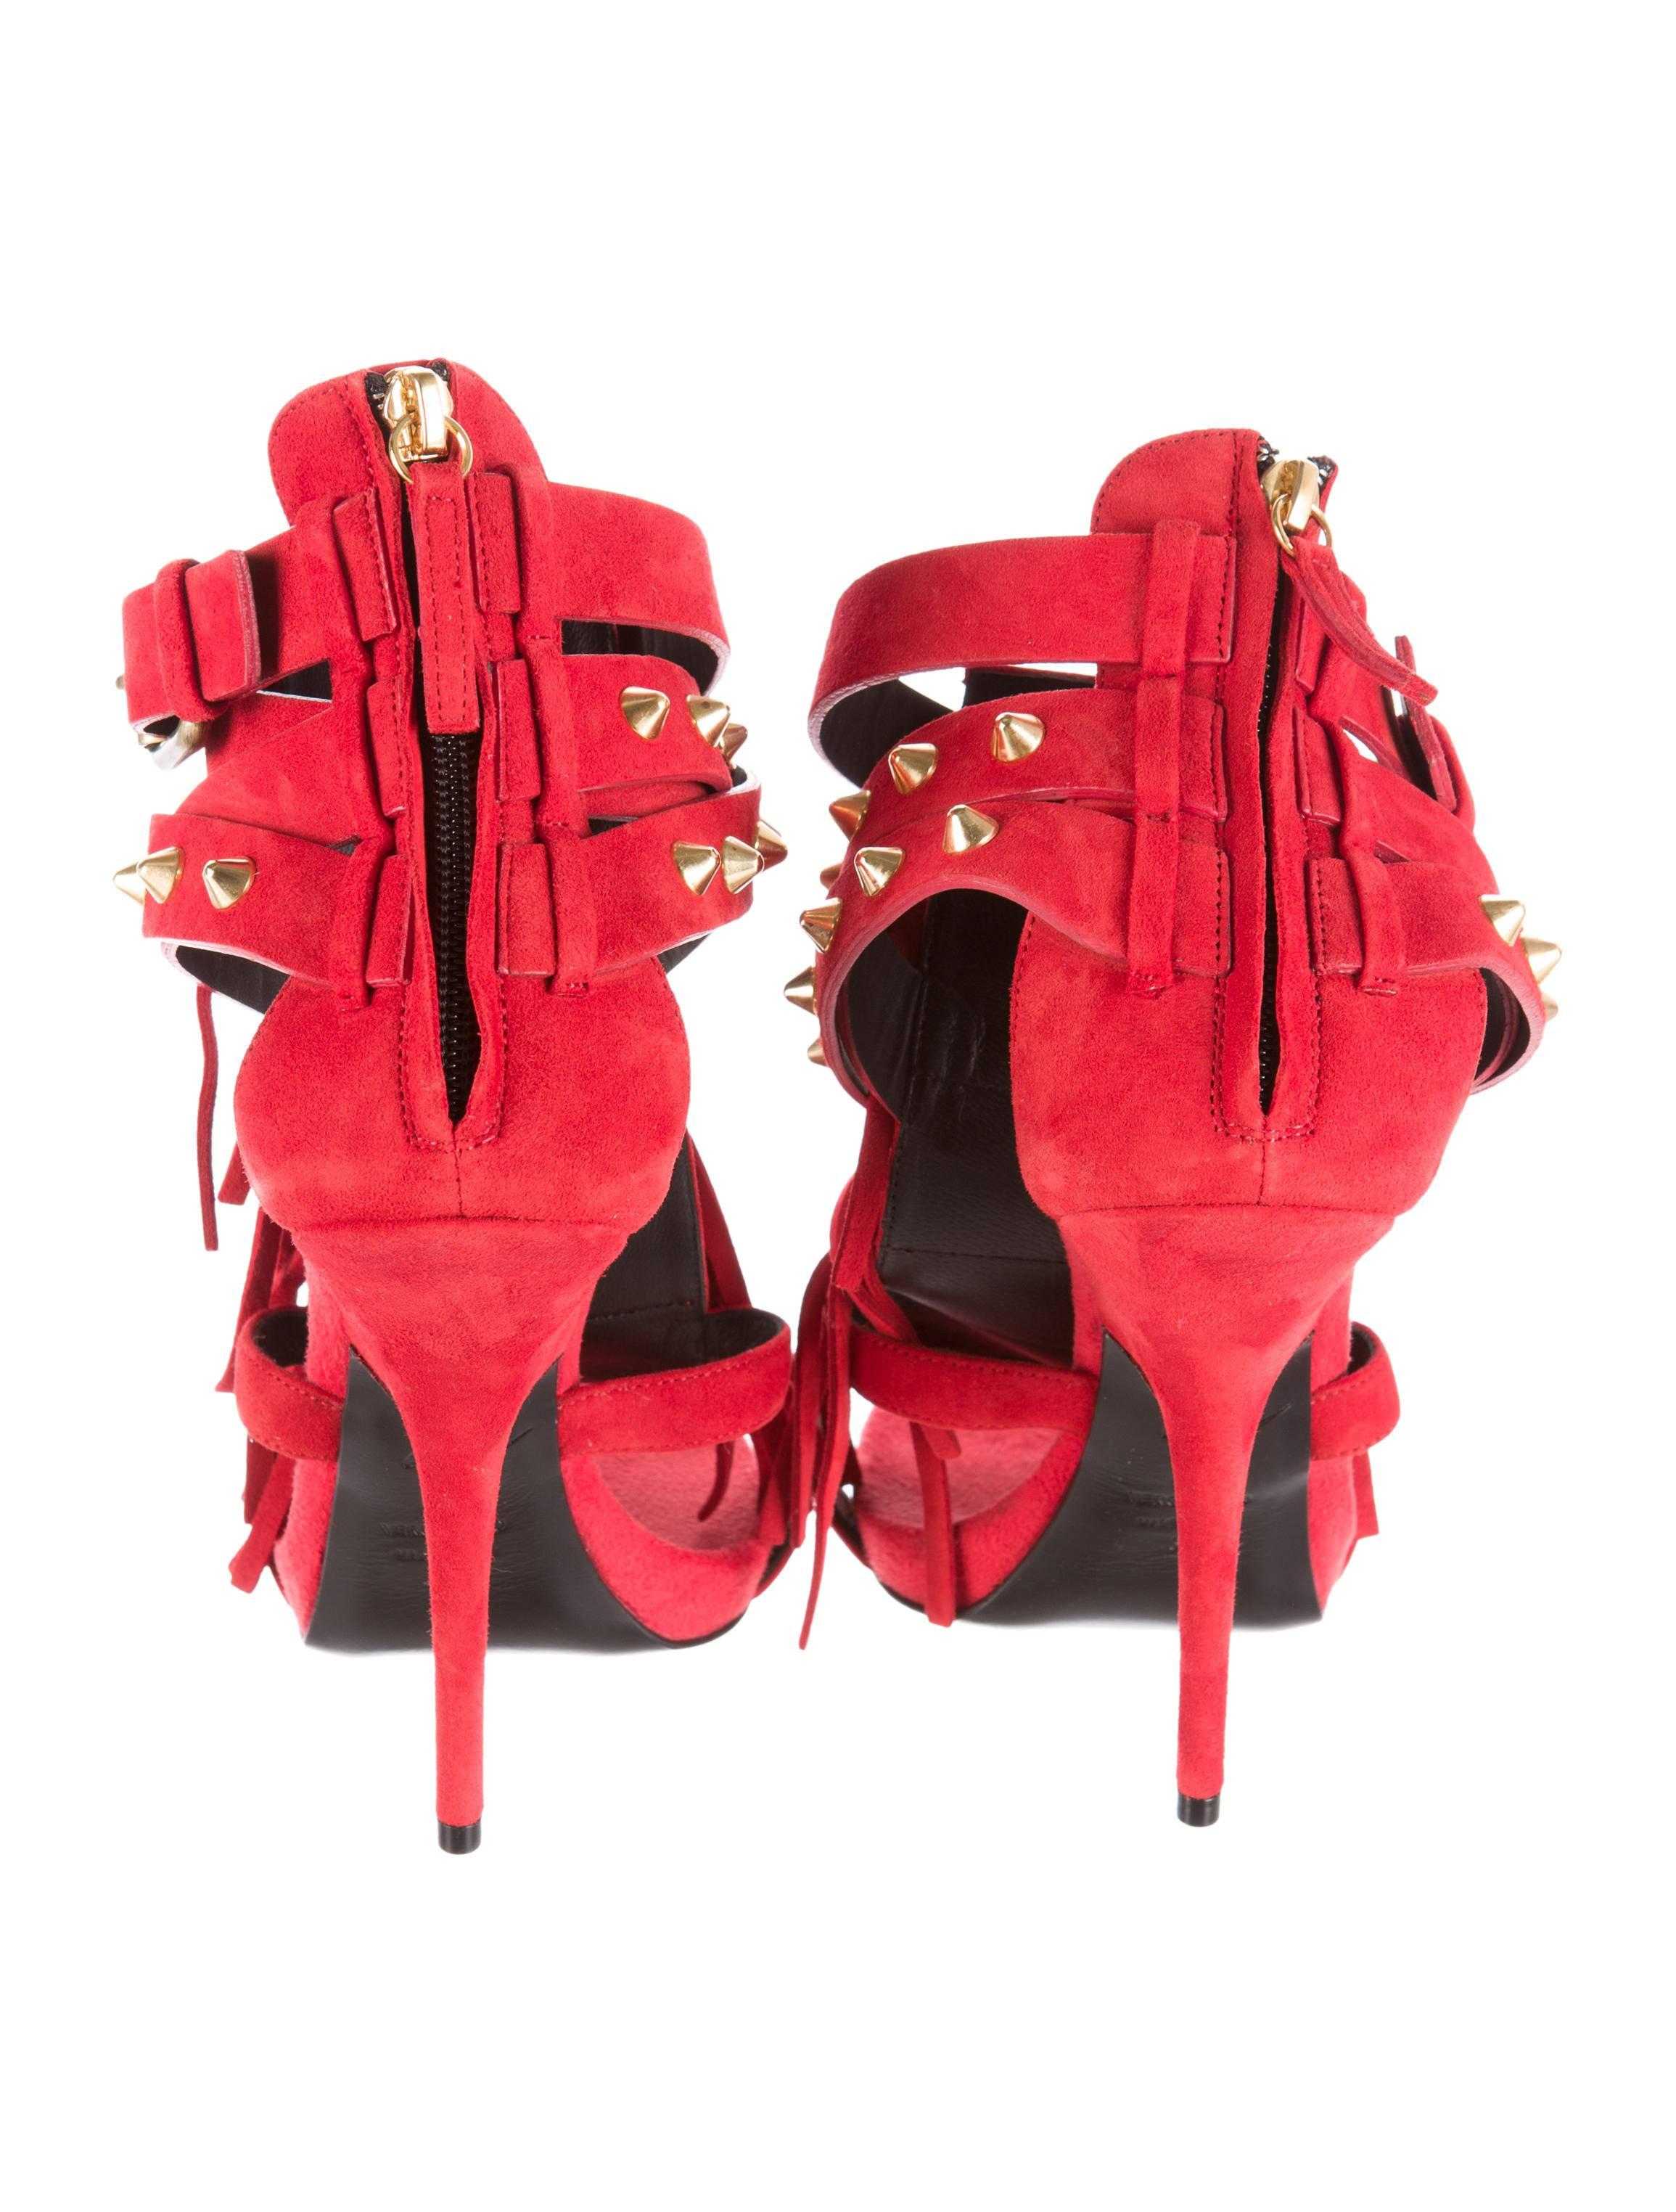 Giuseppe Zanotti New Red Suede Stud Tassel Sandals Heels in Box In New Condition In Chicago, IL